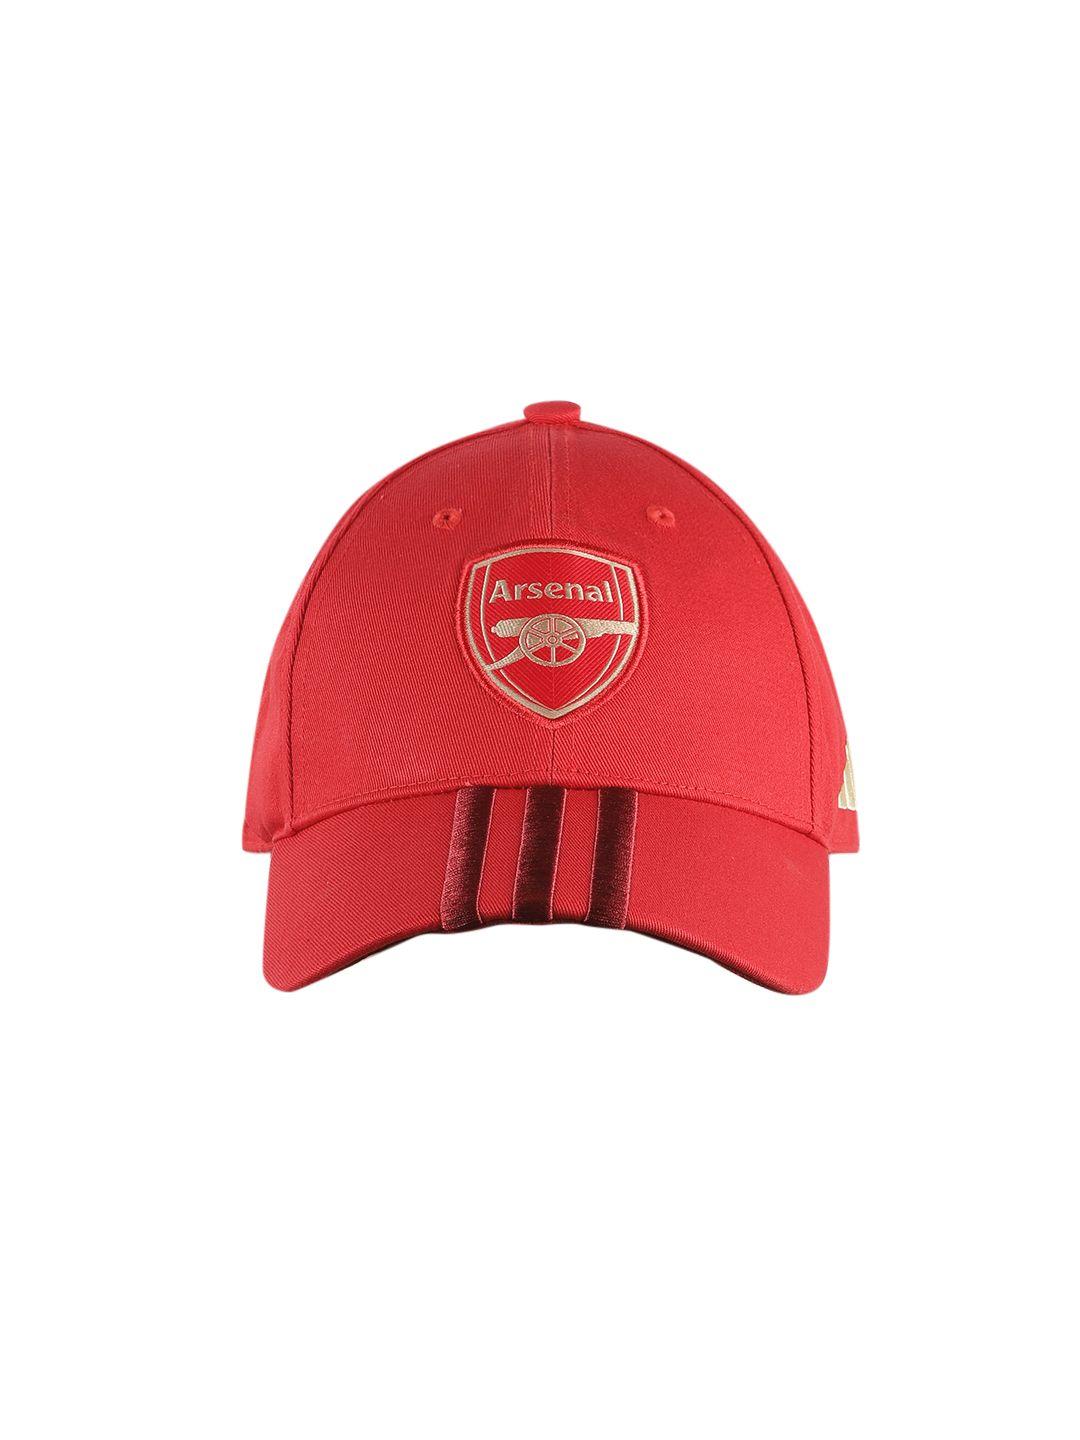 adidas unisex embroidered cotton afc arsenal football baseball cap with applique detail